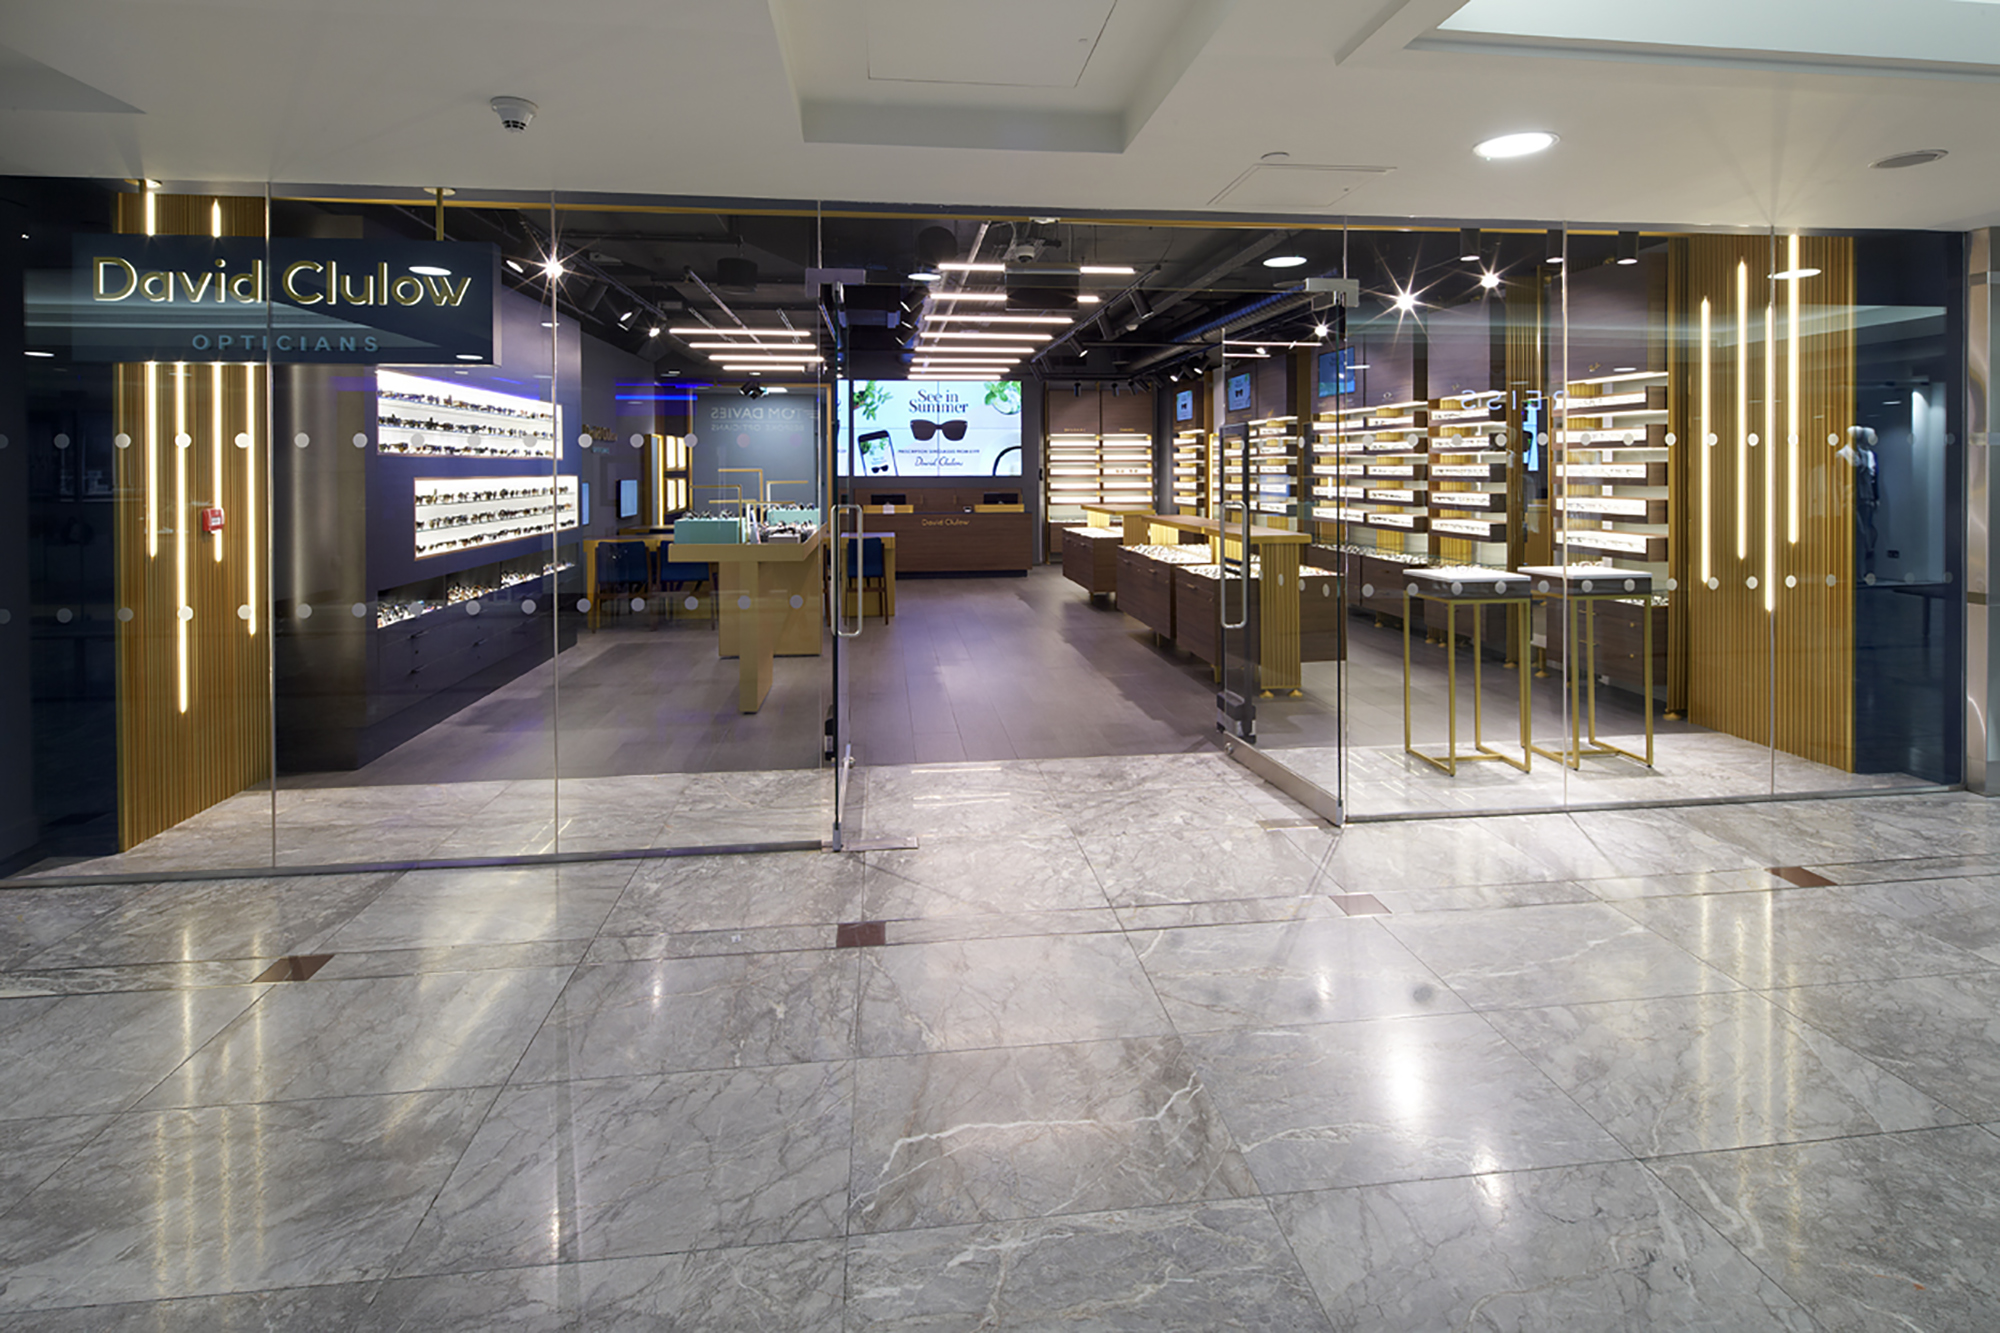 David Clulow combines luxury with rigorous and professional eyecare